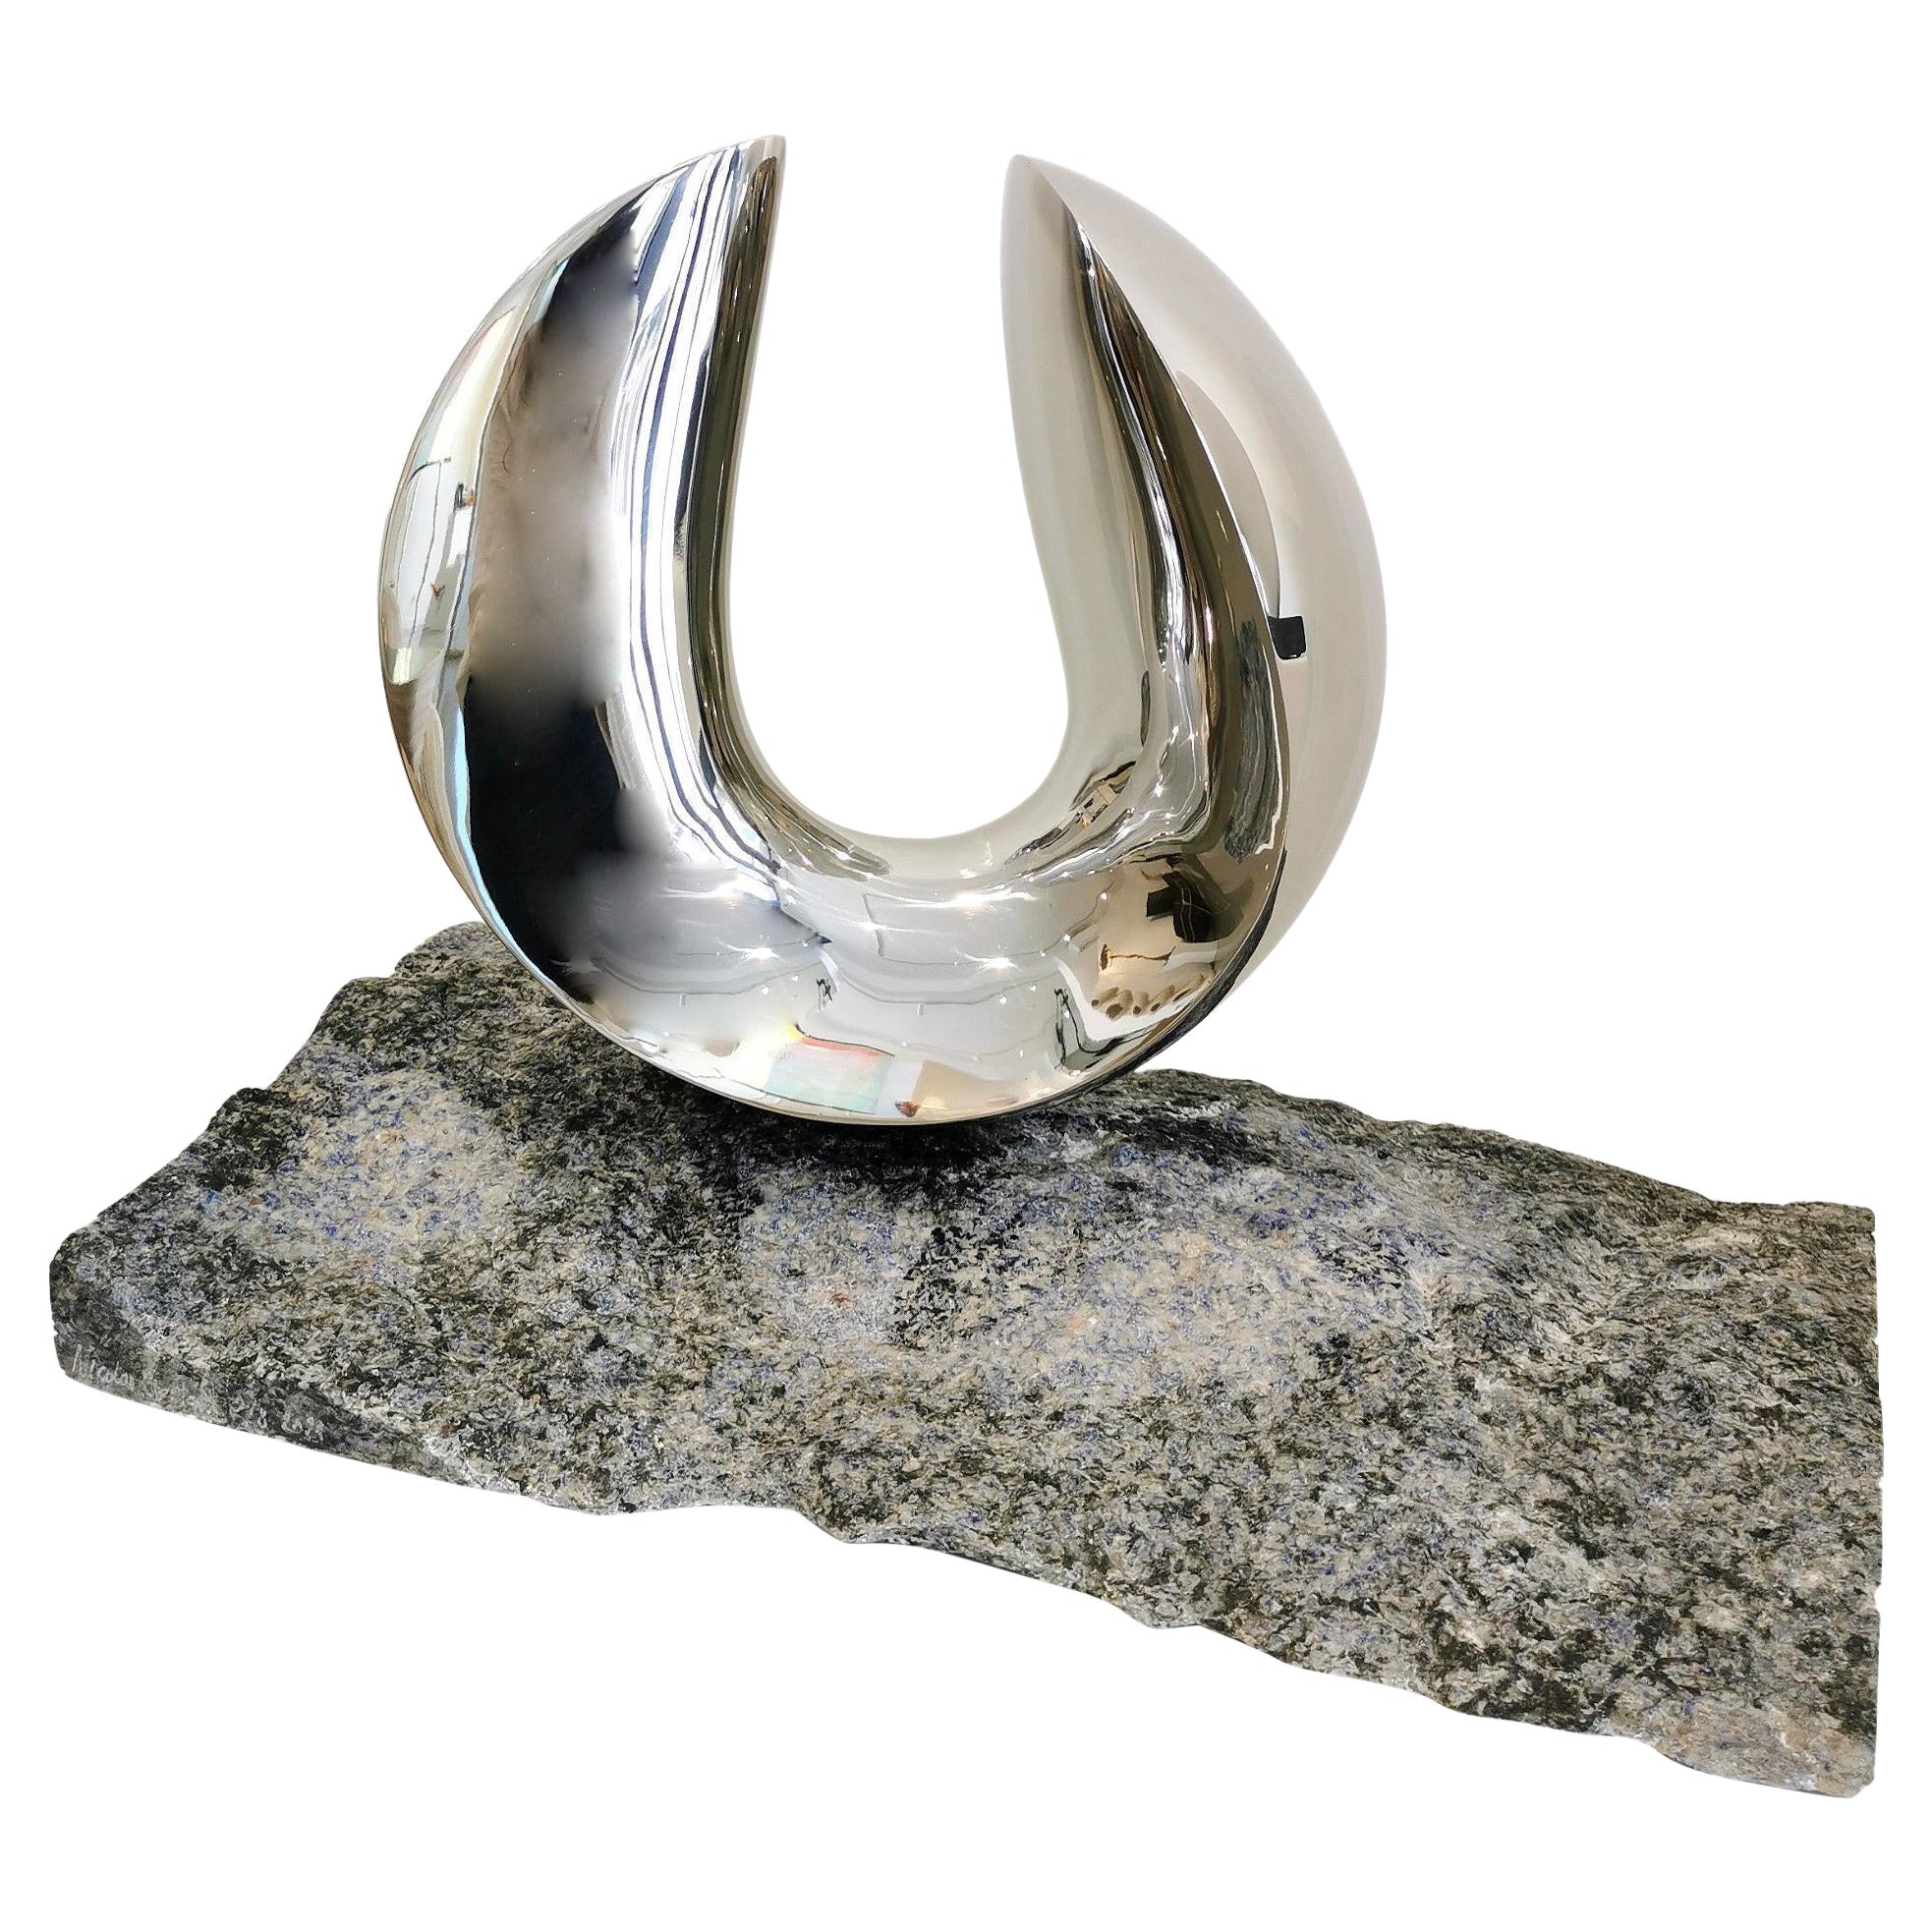 21st Century Abstract Sculpture Ring by Nicolas Bertoux